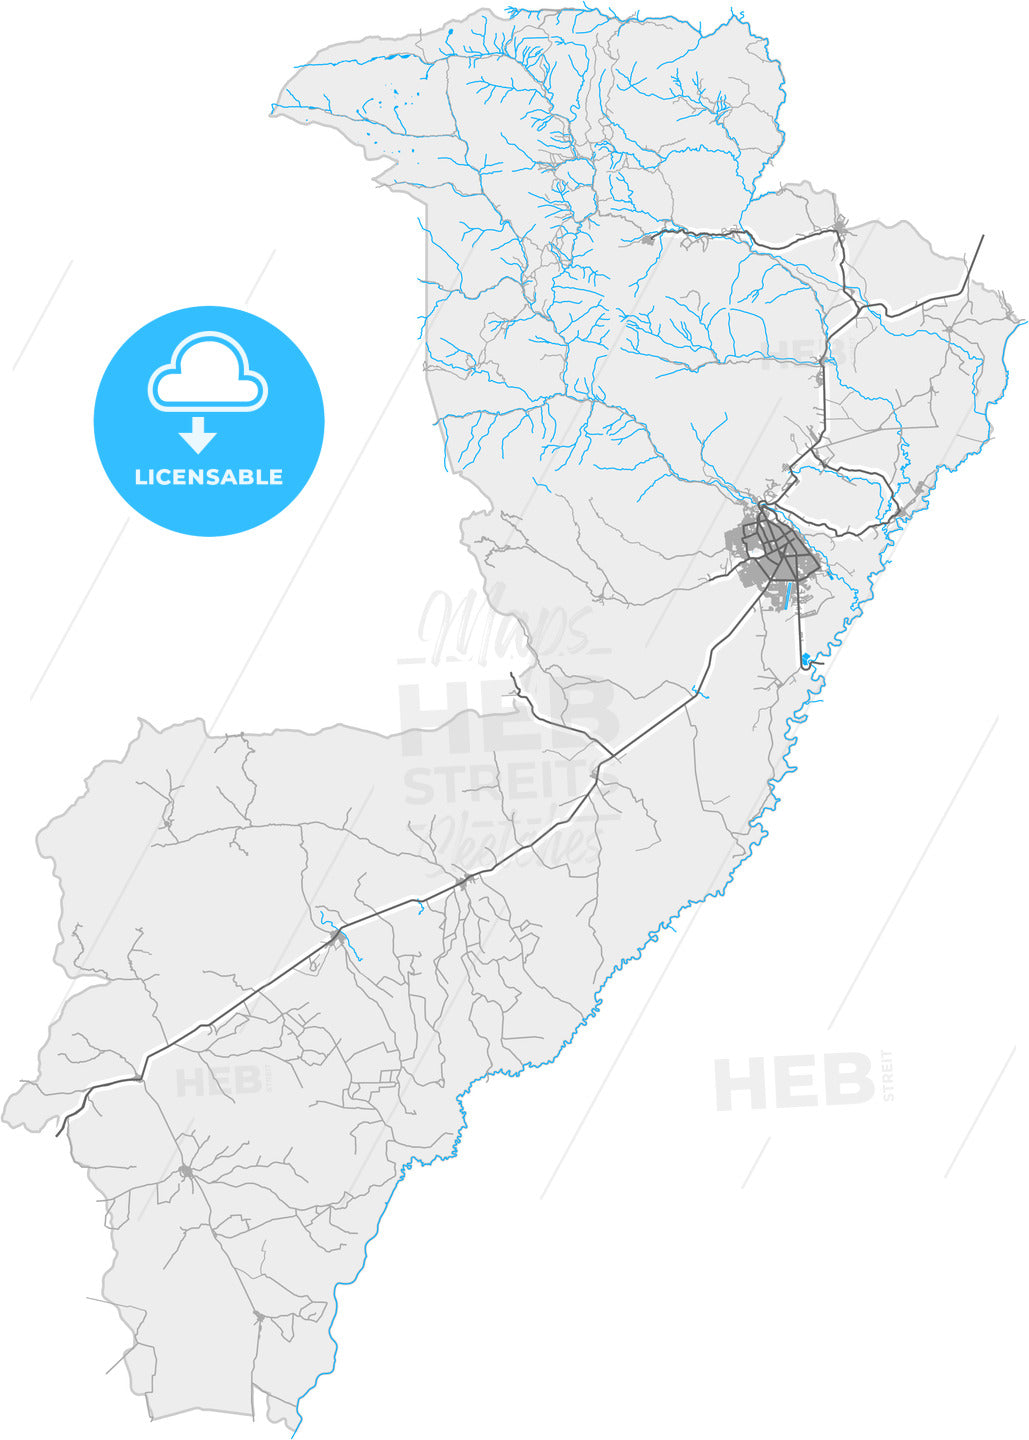 Valledupar, Colombia, high quality vector map